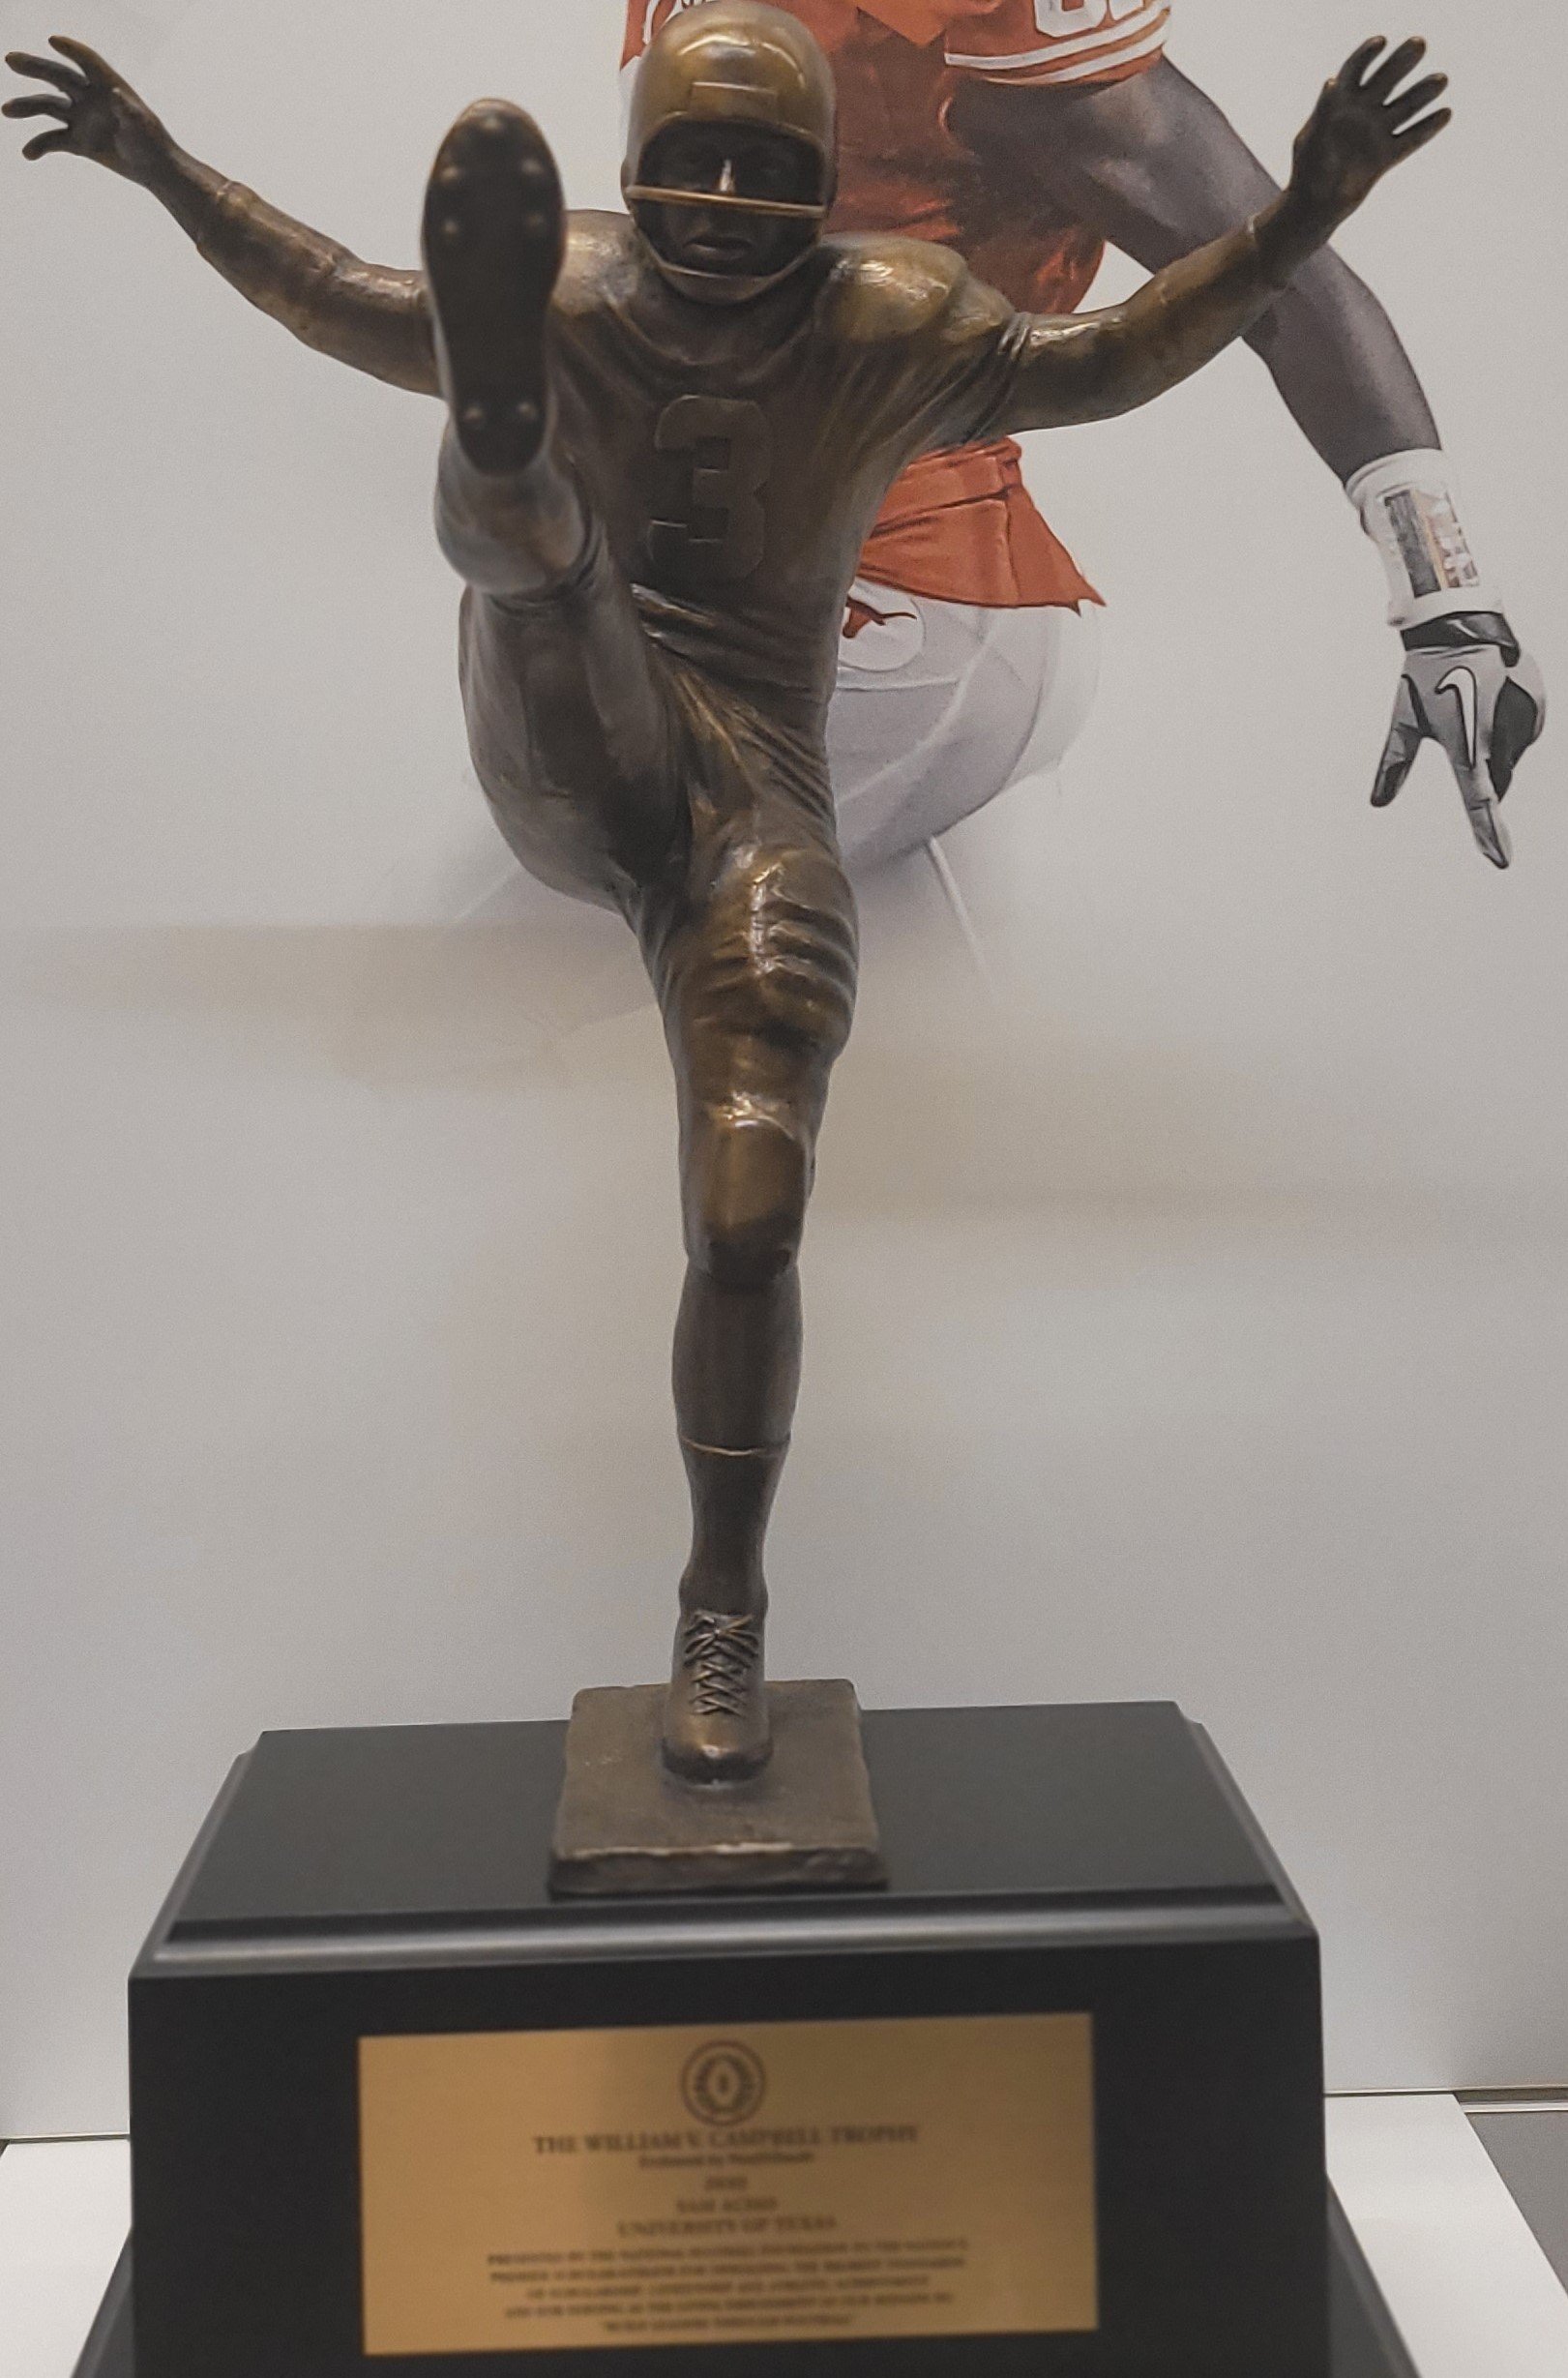 Recognized in North End zone   Campbell Trophy (Academic Heisman)   Dallas Griffin - 2007 and Sam Acho 2010.jpg